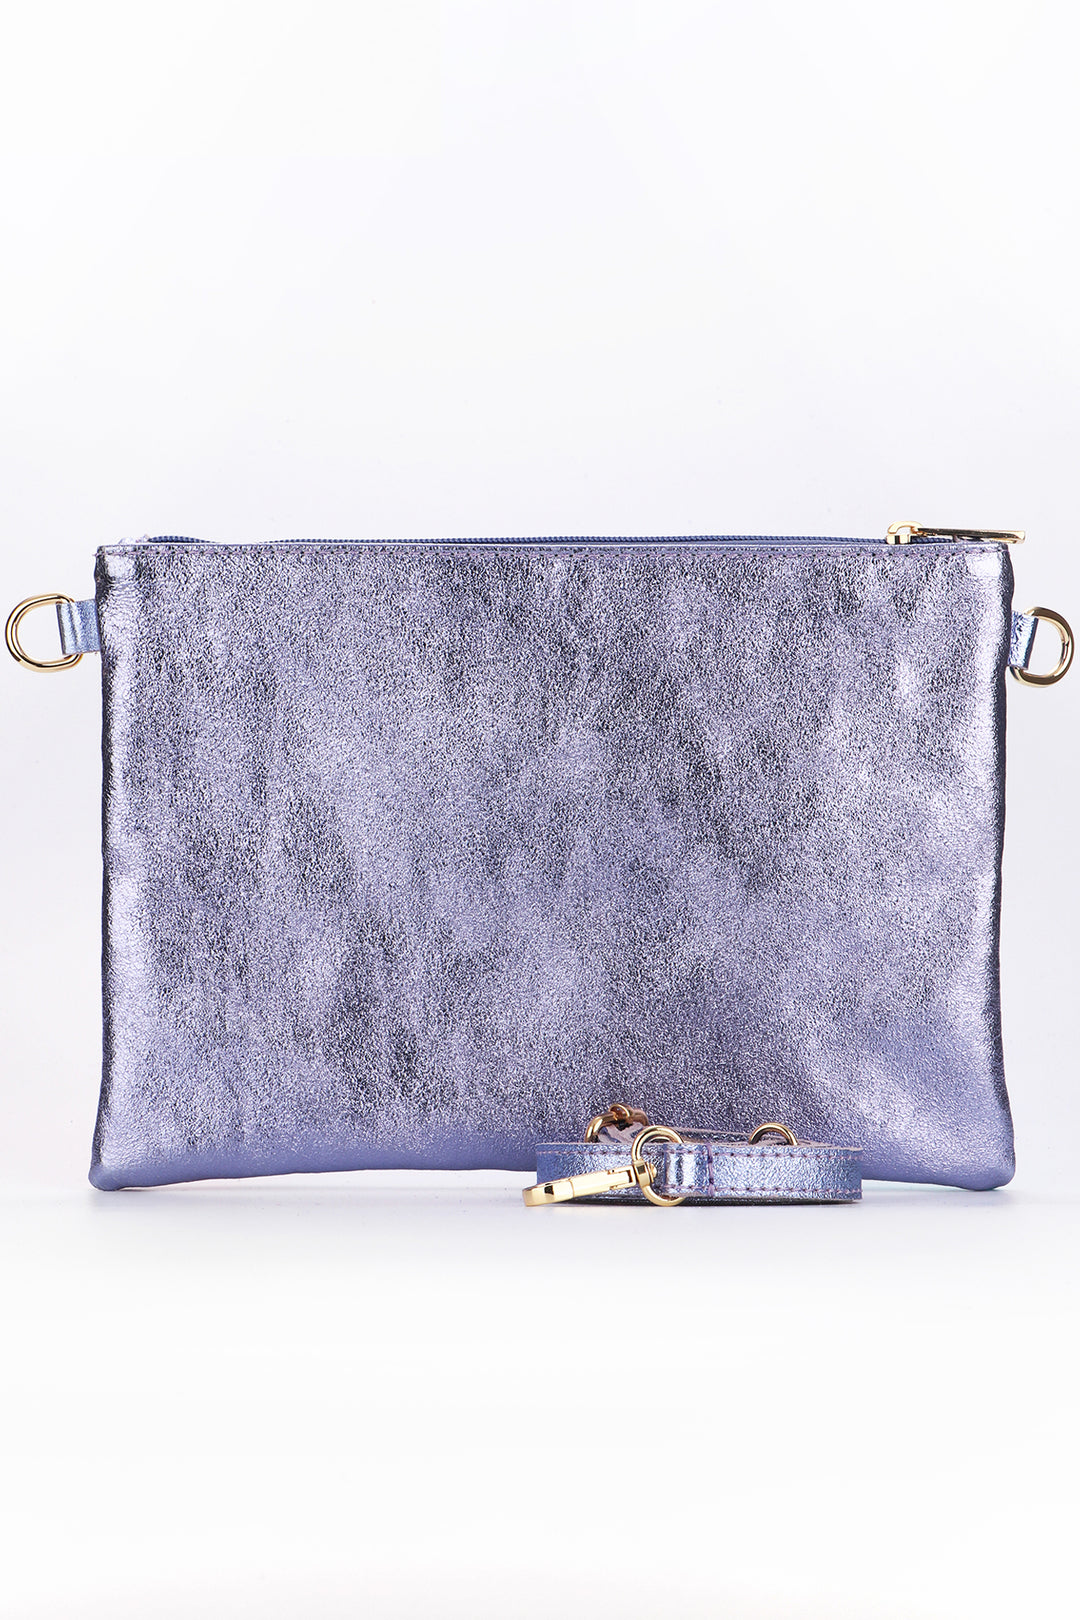 the back of the wristlet clutch is in a solid metallic lilac colour